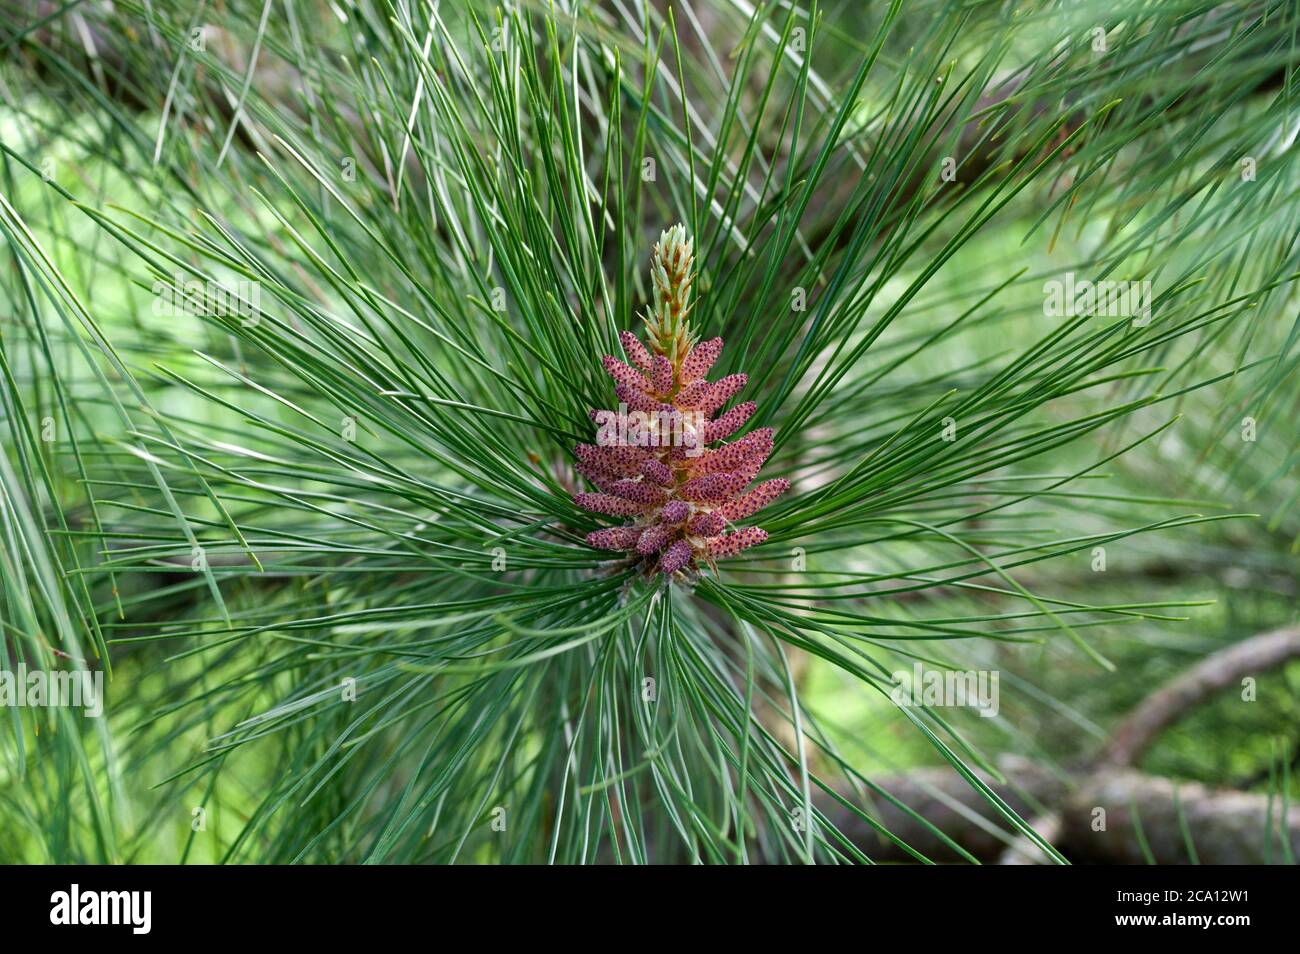 Male flower of Red Pine tree, Pinus resinosa, composed of pollen cones formed at the base of new shoot. Stock Photo